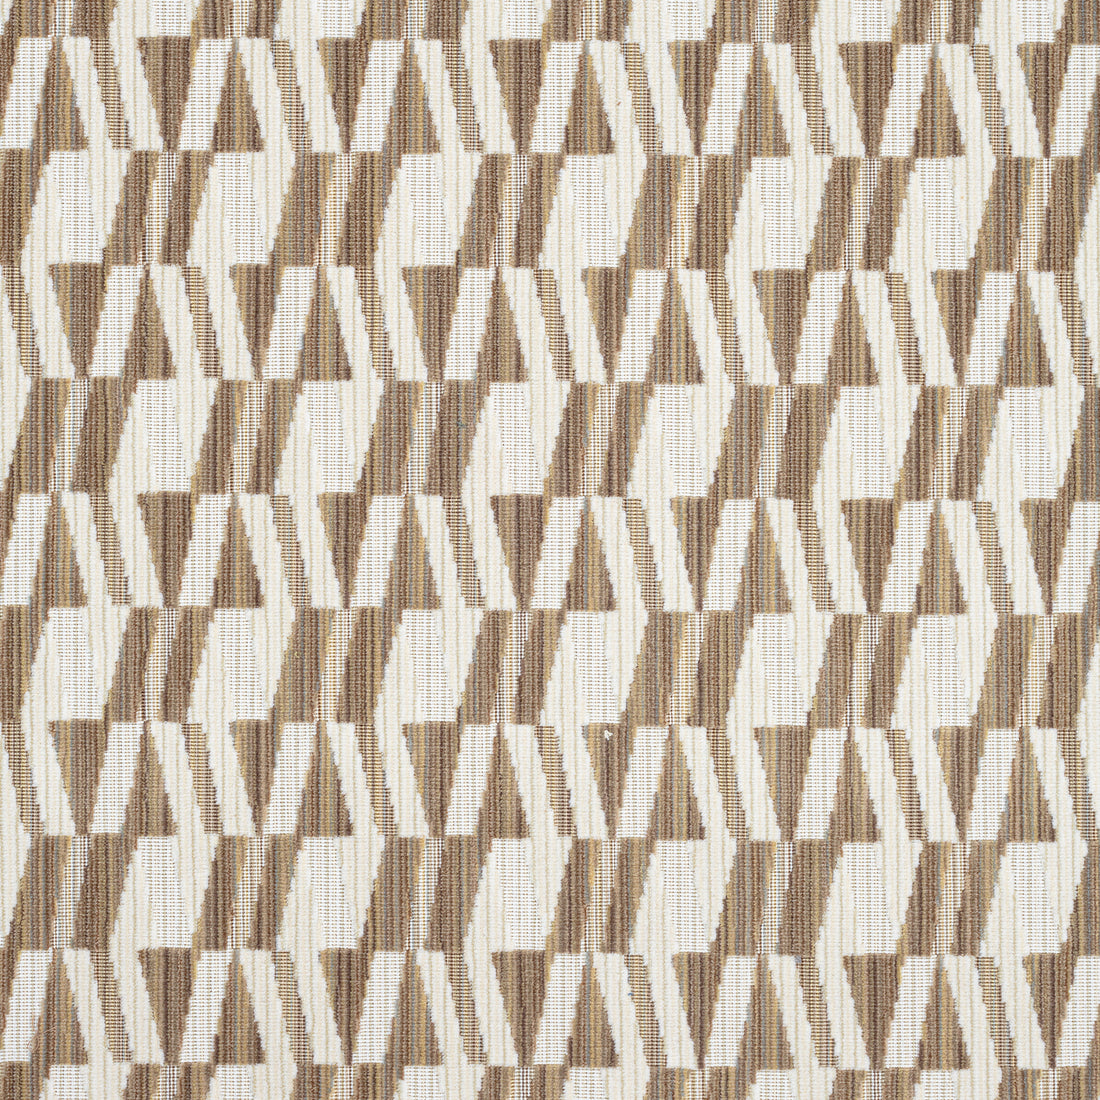 Bossa Nova Velvet fabric in grain color - pattern number W72814 - by Thibaut in the Woven Resource 13: Fusion Velvets collection